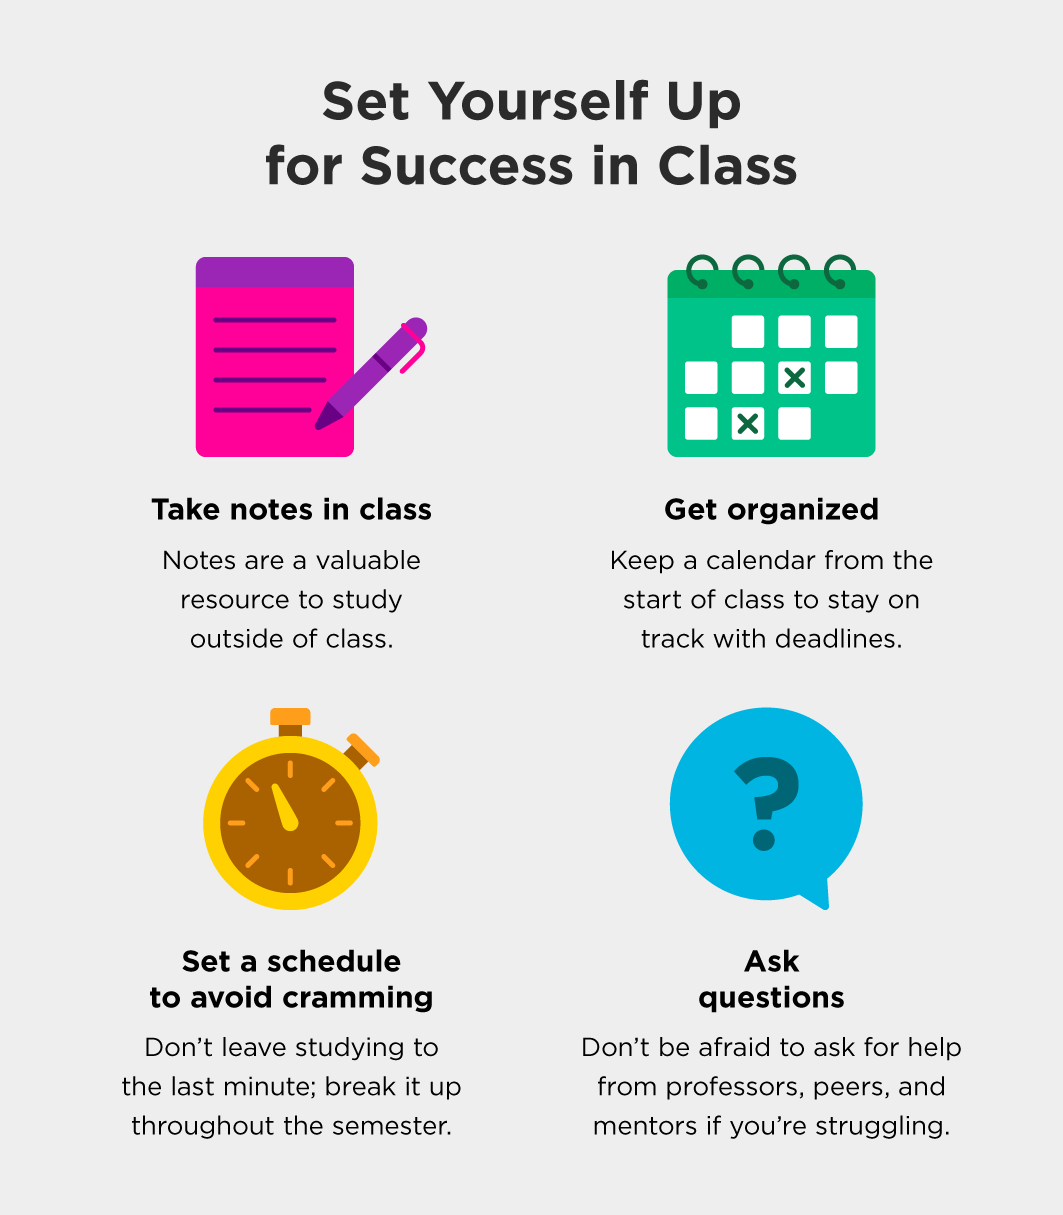 Image recaps tips that start in the classroom to make studying easier later.